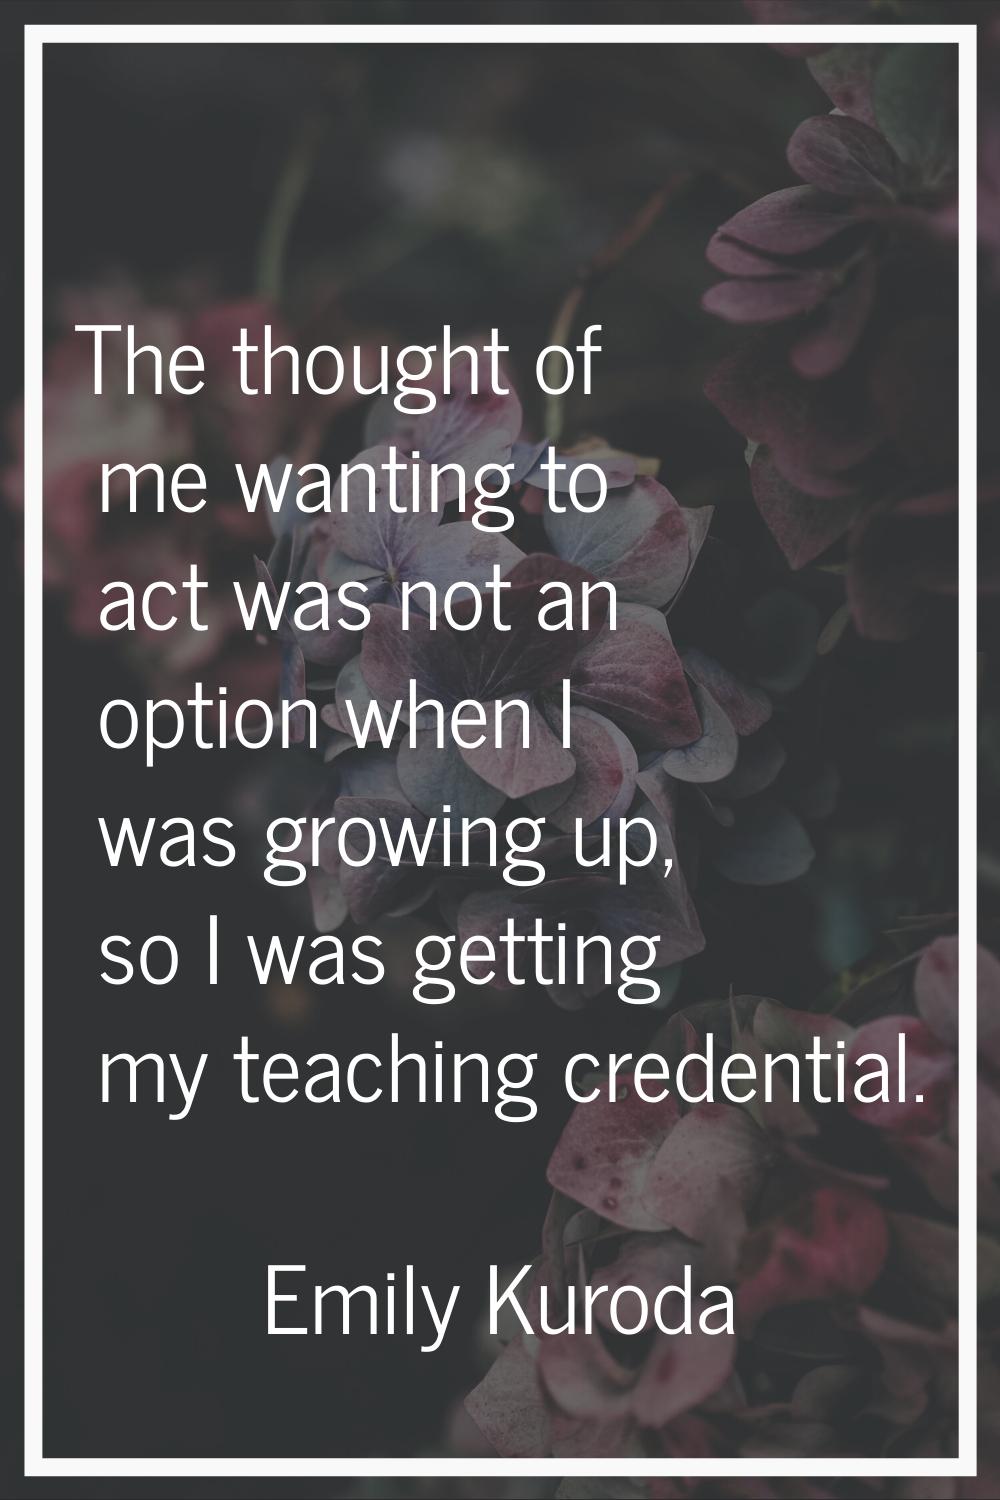 The thought of me wanting to act was not an option when I was growing up, so I was getting my teach